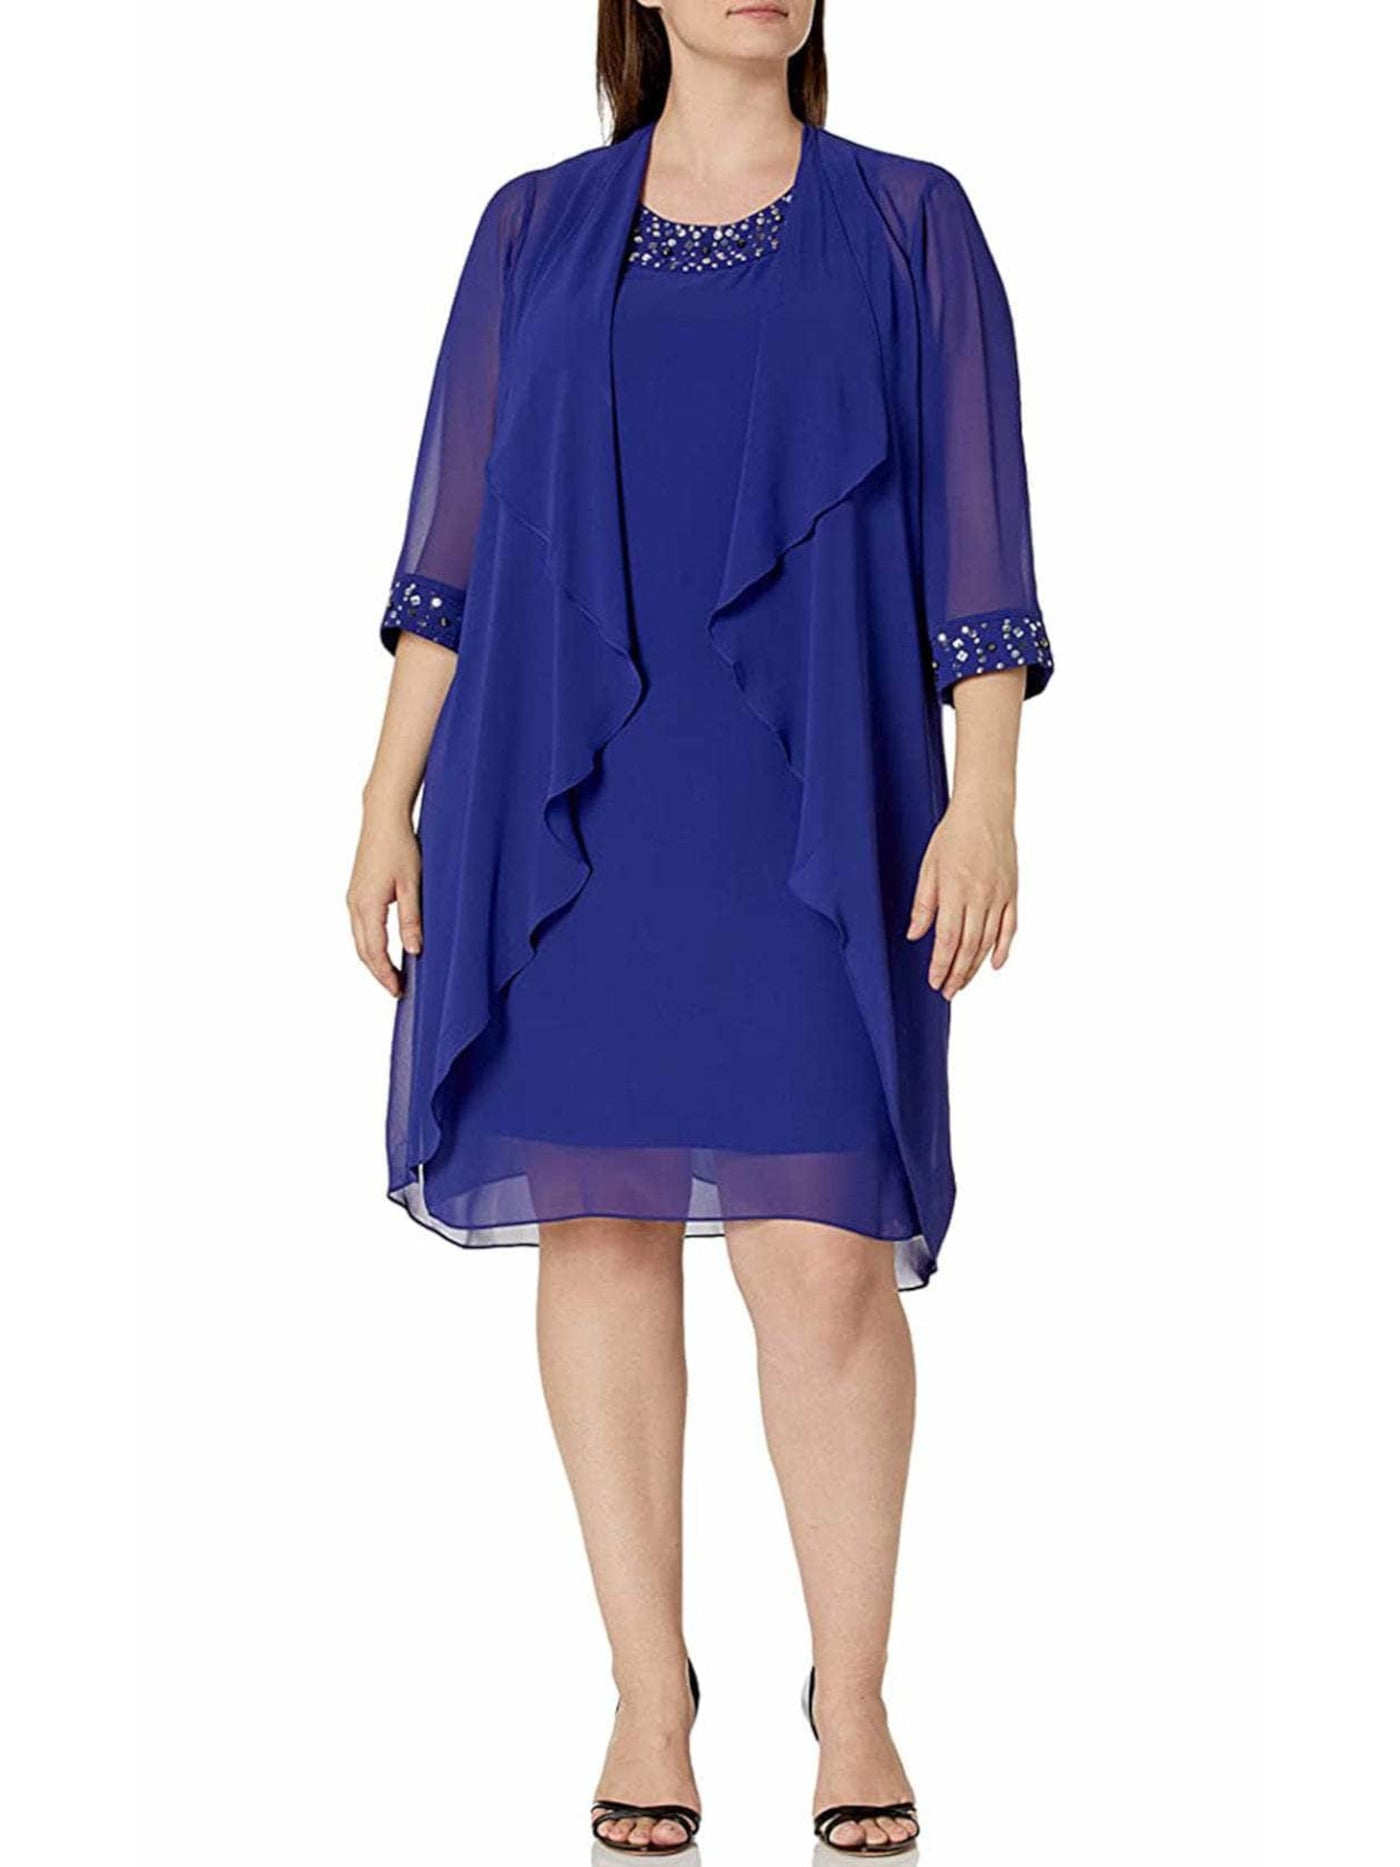 SLNY Womens Blue Sheer Embellished Draped 3/4 Sleeve Open Front Evening Duster Top Plus 20W